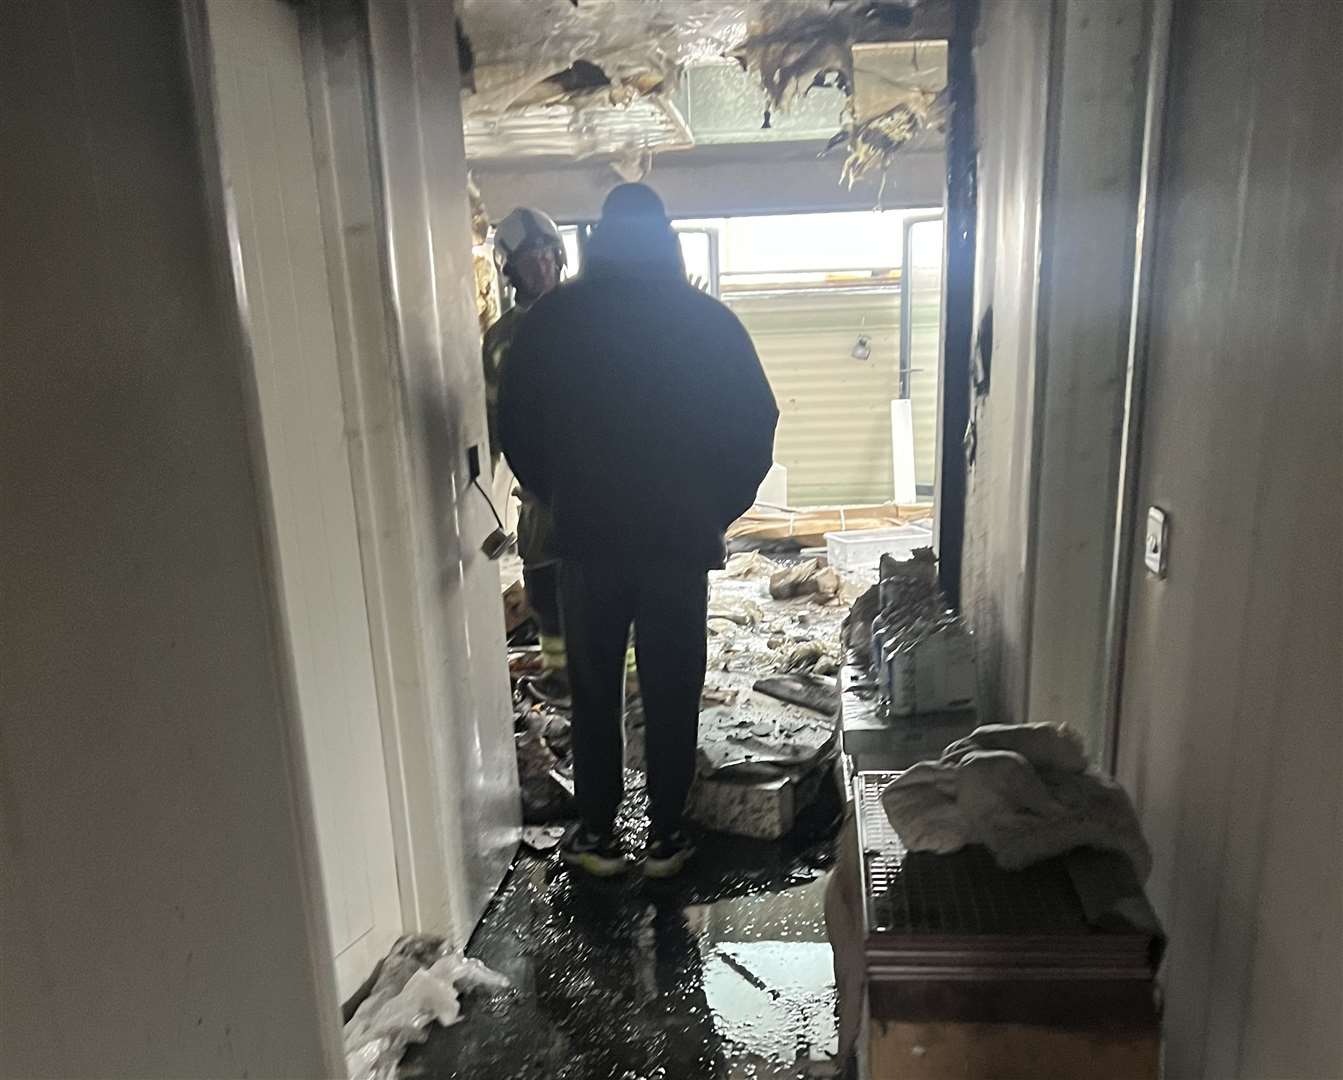 The fire caused significant damage to the newly renovated property